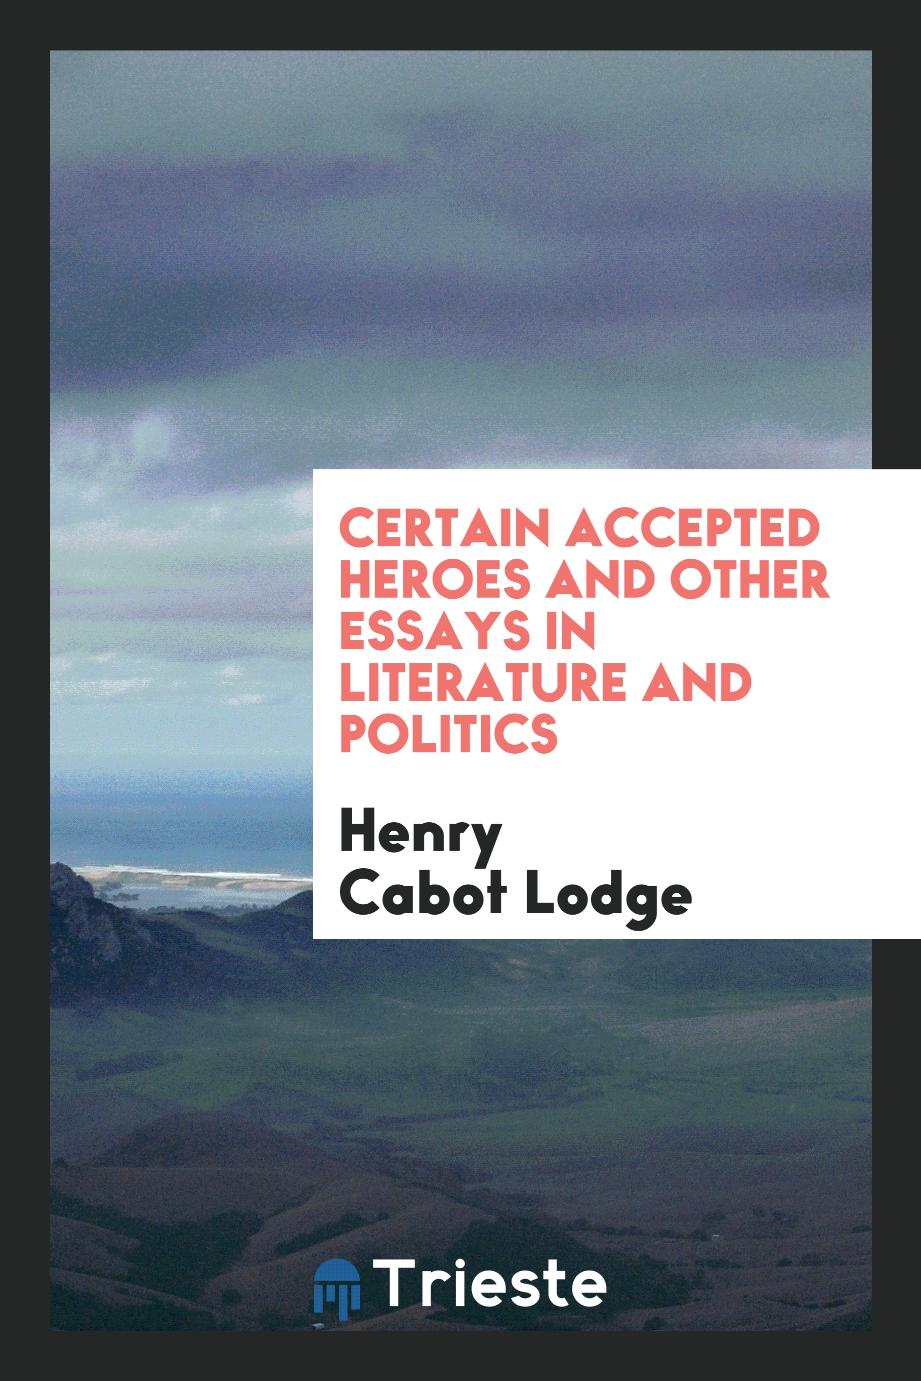 Certain accepted heroes and other essays in literature and politics